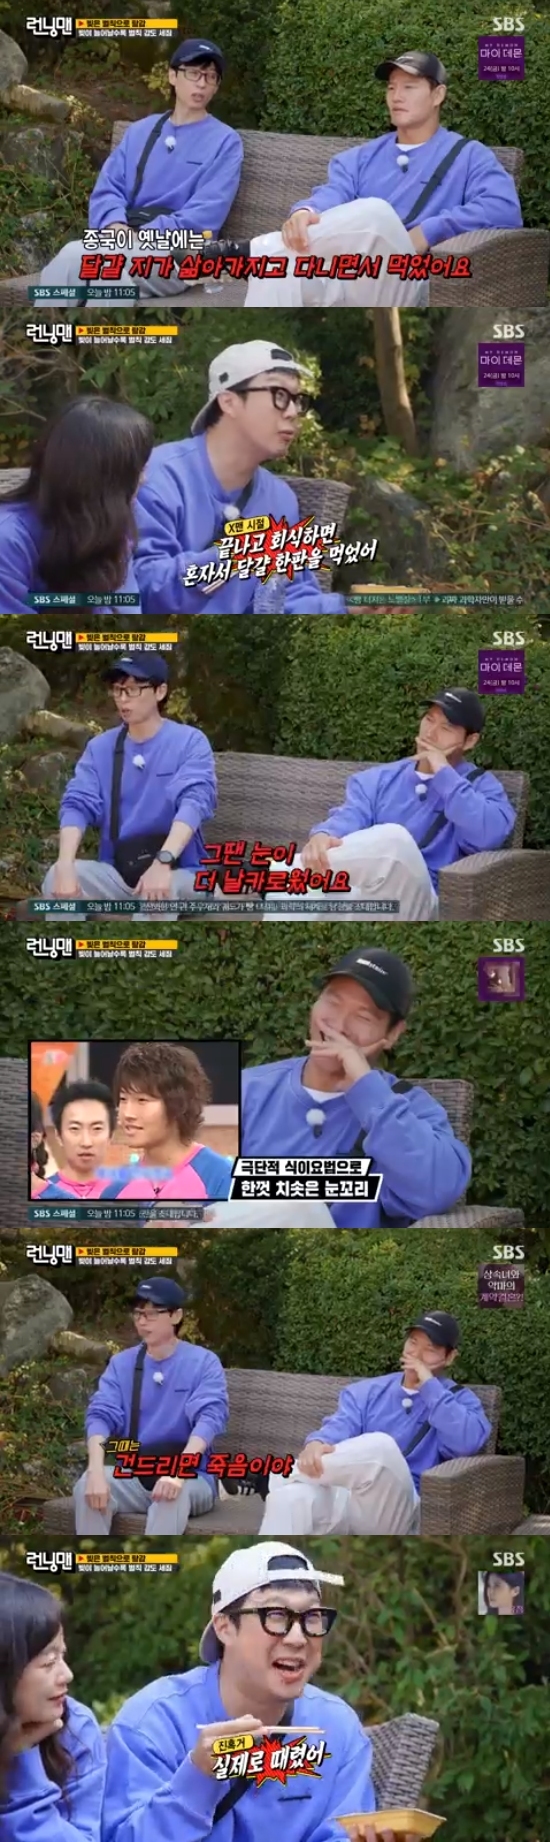 Running Man members revealed that everyone was disappointed with the disjoint news of Jeon So-min.The SBS entertainment program Running Man was broadcast on the 5th, and all the expenses enjoyed during the day from meals to play were accumulated in debt, and the Dream of Million Won race was held to exempt the debt from penalties.On this days broadcast, members of Jeon So-mins Running Man disjoint news were portrayed.On the day of recording, Jeon So-mins disjoint article appeared, and Yoo Jae-Suk asked, So Min, you disjoint?Jeon So-min said, Didnt you already know? and Yoo Jae-suk said, Im not in the mood right now. I feel empty inside.In response, Jeon So-min asked, Then push me to win first place today. Ive never won a prize before, but drew a line and drew laughter.In fact, when the game started, the members who were saddened by the disjoint news of Jeon So-min seemed to be out of date.Jeon So-min was in a situation where he had to be beaten up for debt relief, and Ji Suk-jin came out. Ji Suk-jin was sincere in doing simulations that seriously hit him.Although Jeon So-min pretended to be pitiful to Ji Suk-jin, saying, Brother..., Ji Suk-jin laughed with a cold look at the world.And Ji Suk-jin gave a big smile to the jeon so-min ass with the intensity that simulated.Haha said, This is the taste. Who should I live with now?This is the last one next week, he said with a smile.Kim Jong-kook refused to eat pork belly while other members did not think about debt and grilled pork belly.Yoo Jae-Suk said, In the past, I used to boil Chicken Egg directly and eat it. Haha recalled, In the days of X Man, my brother had eaten Chicken Egg alone at dinner.Yoo Jae-suk said, I brought Chicken Egg to the karaoke room and bought it. At that time, my eyes were sharper. It was death to touch it. Haha gave a big smile by saying, And I actually hit it.Photo: SBS broadcast screen